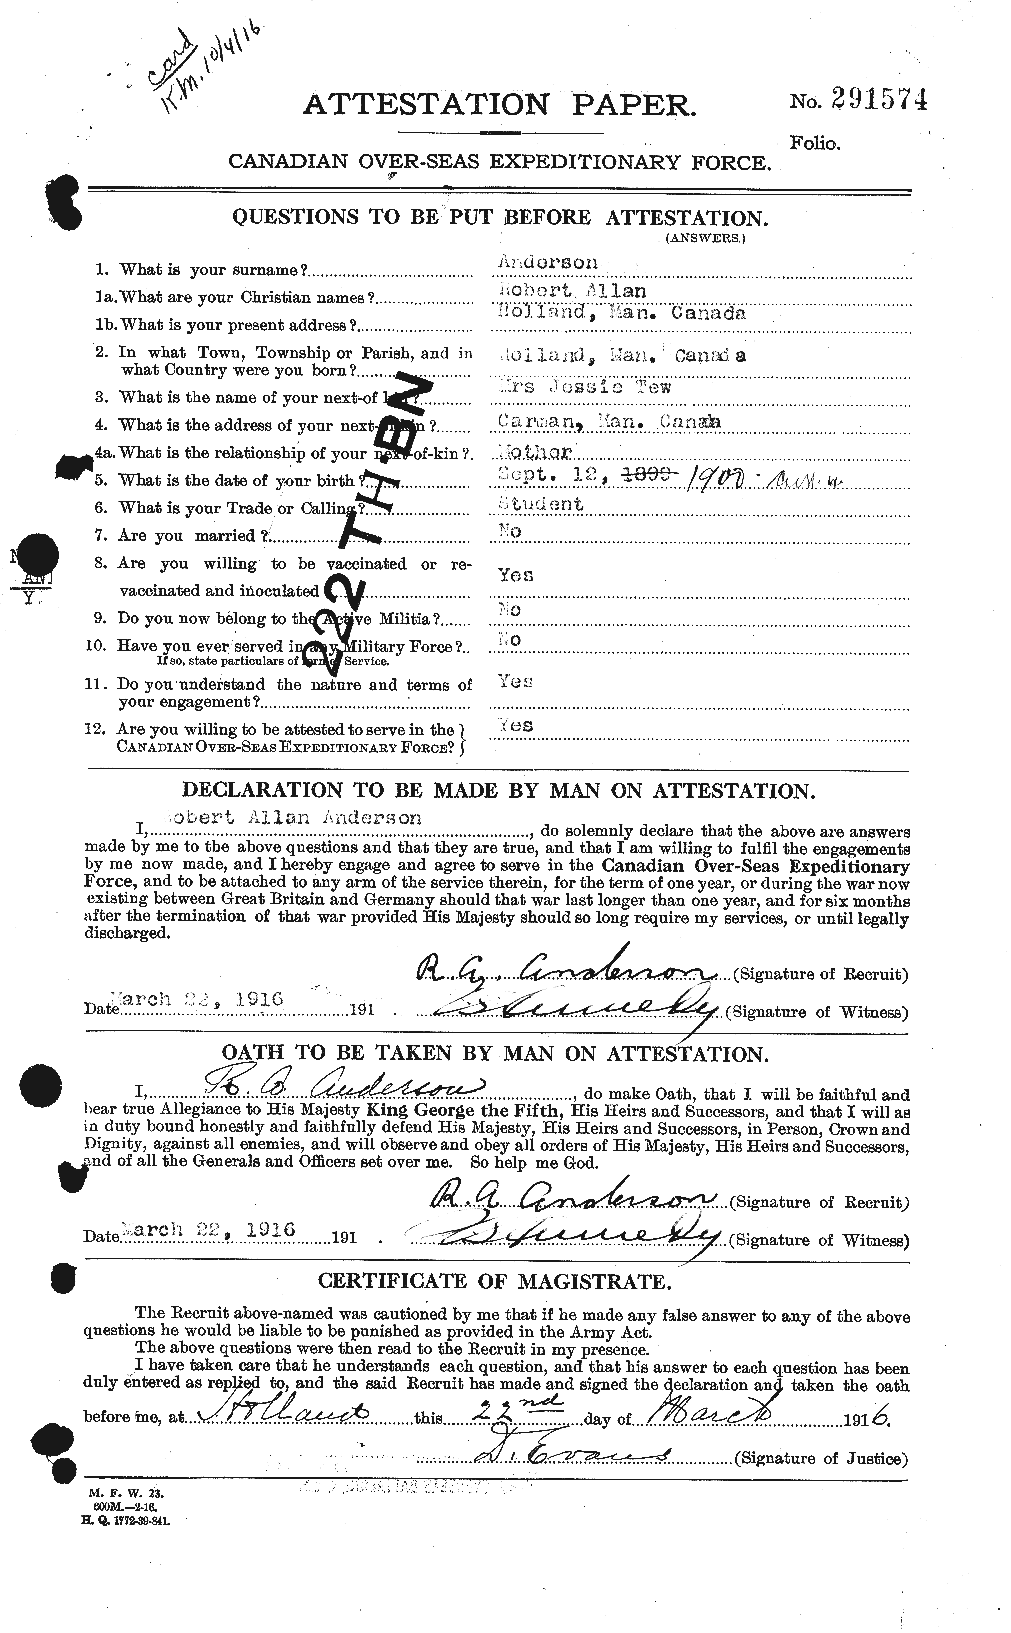 Personnel Records of the First World War - CEF 207272a